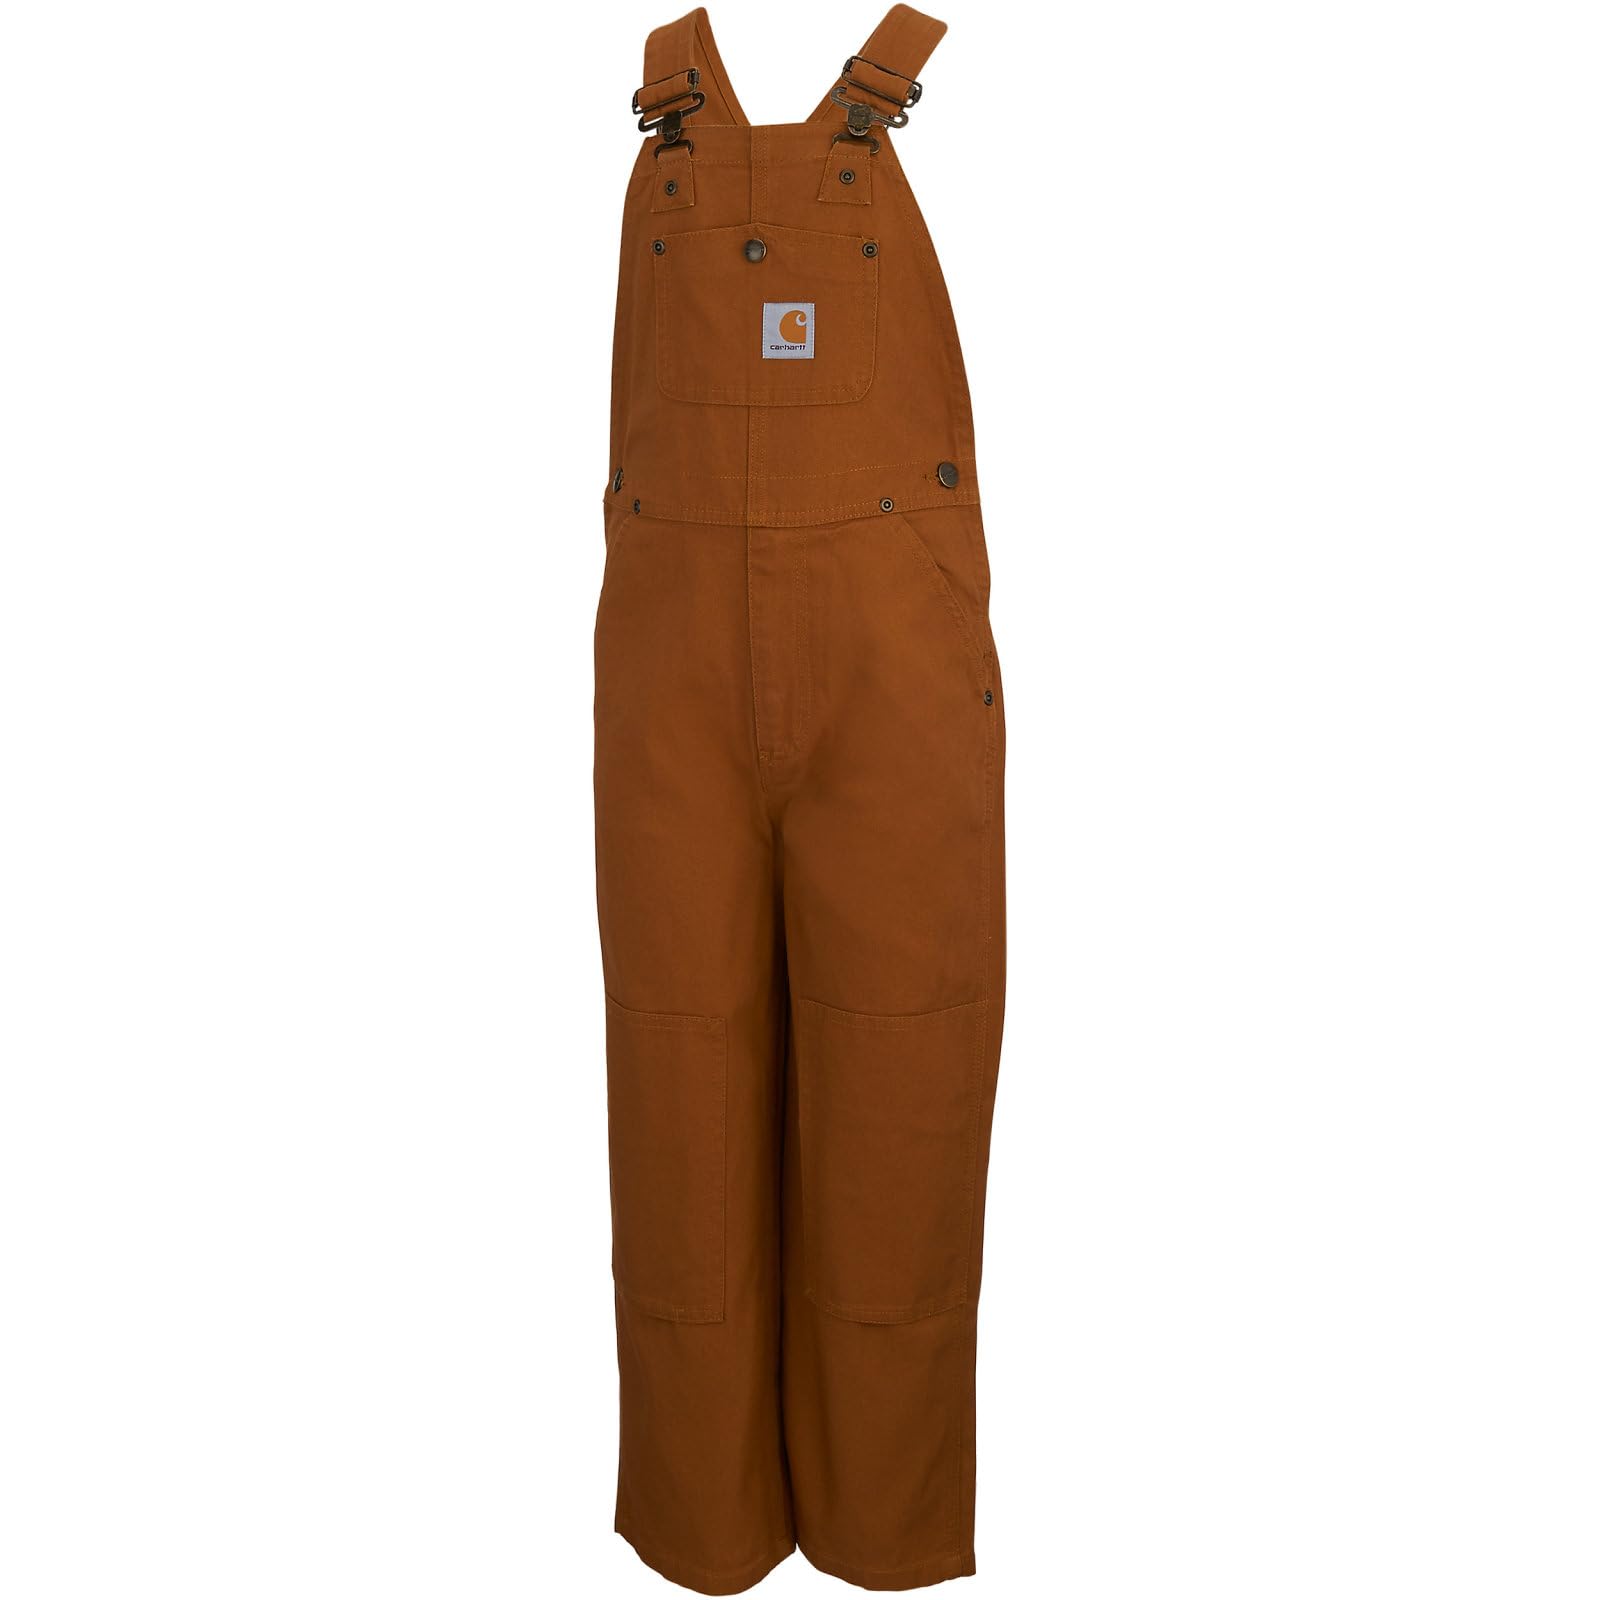 Carhartt boys Bib Overalls (Lined and Unlined),Carhartt Brown Canvas,8